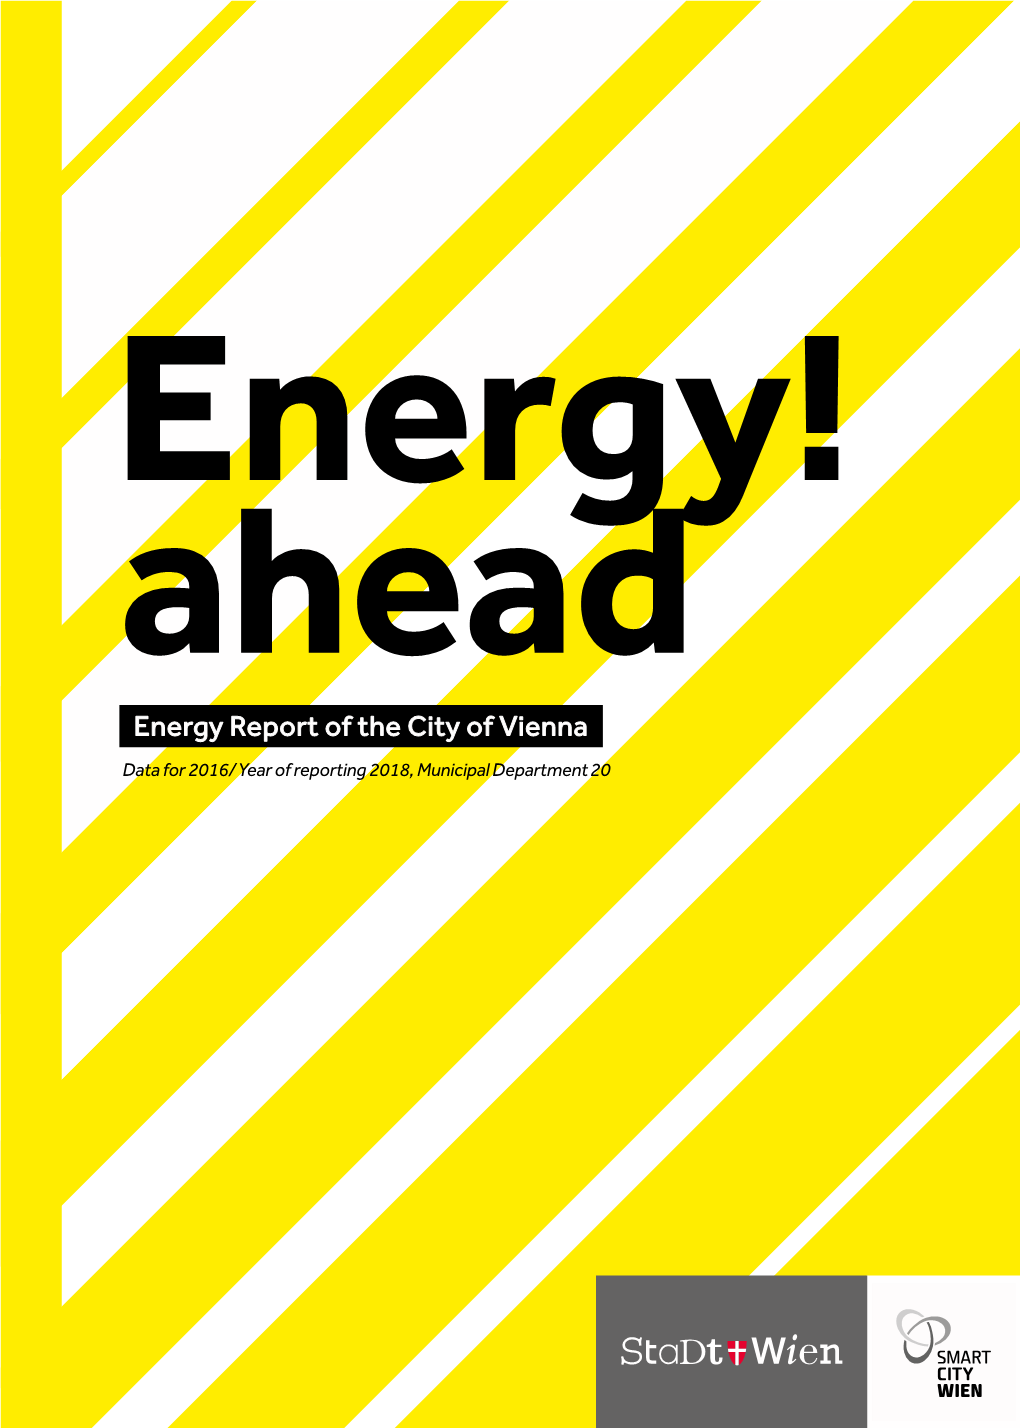 Energy Report of the City of Vienna